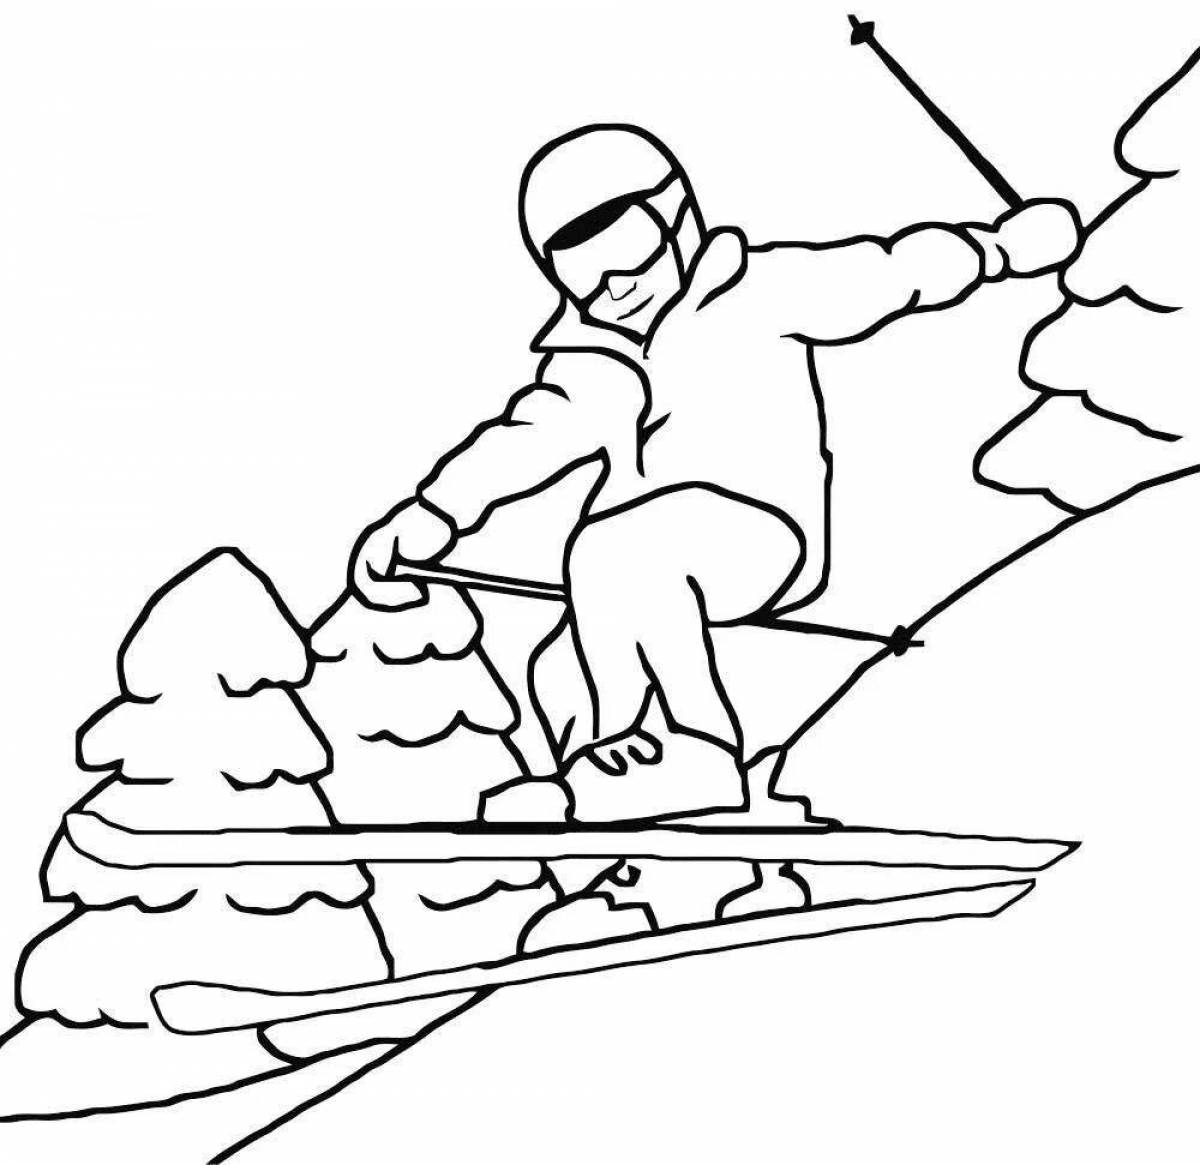 Great skiing coloring page